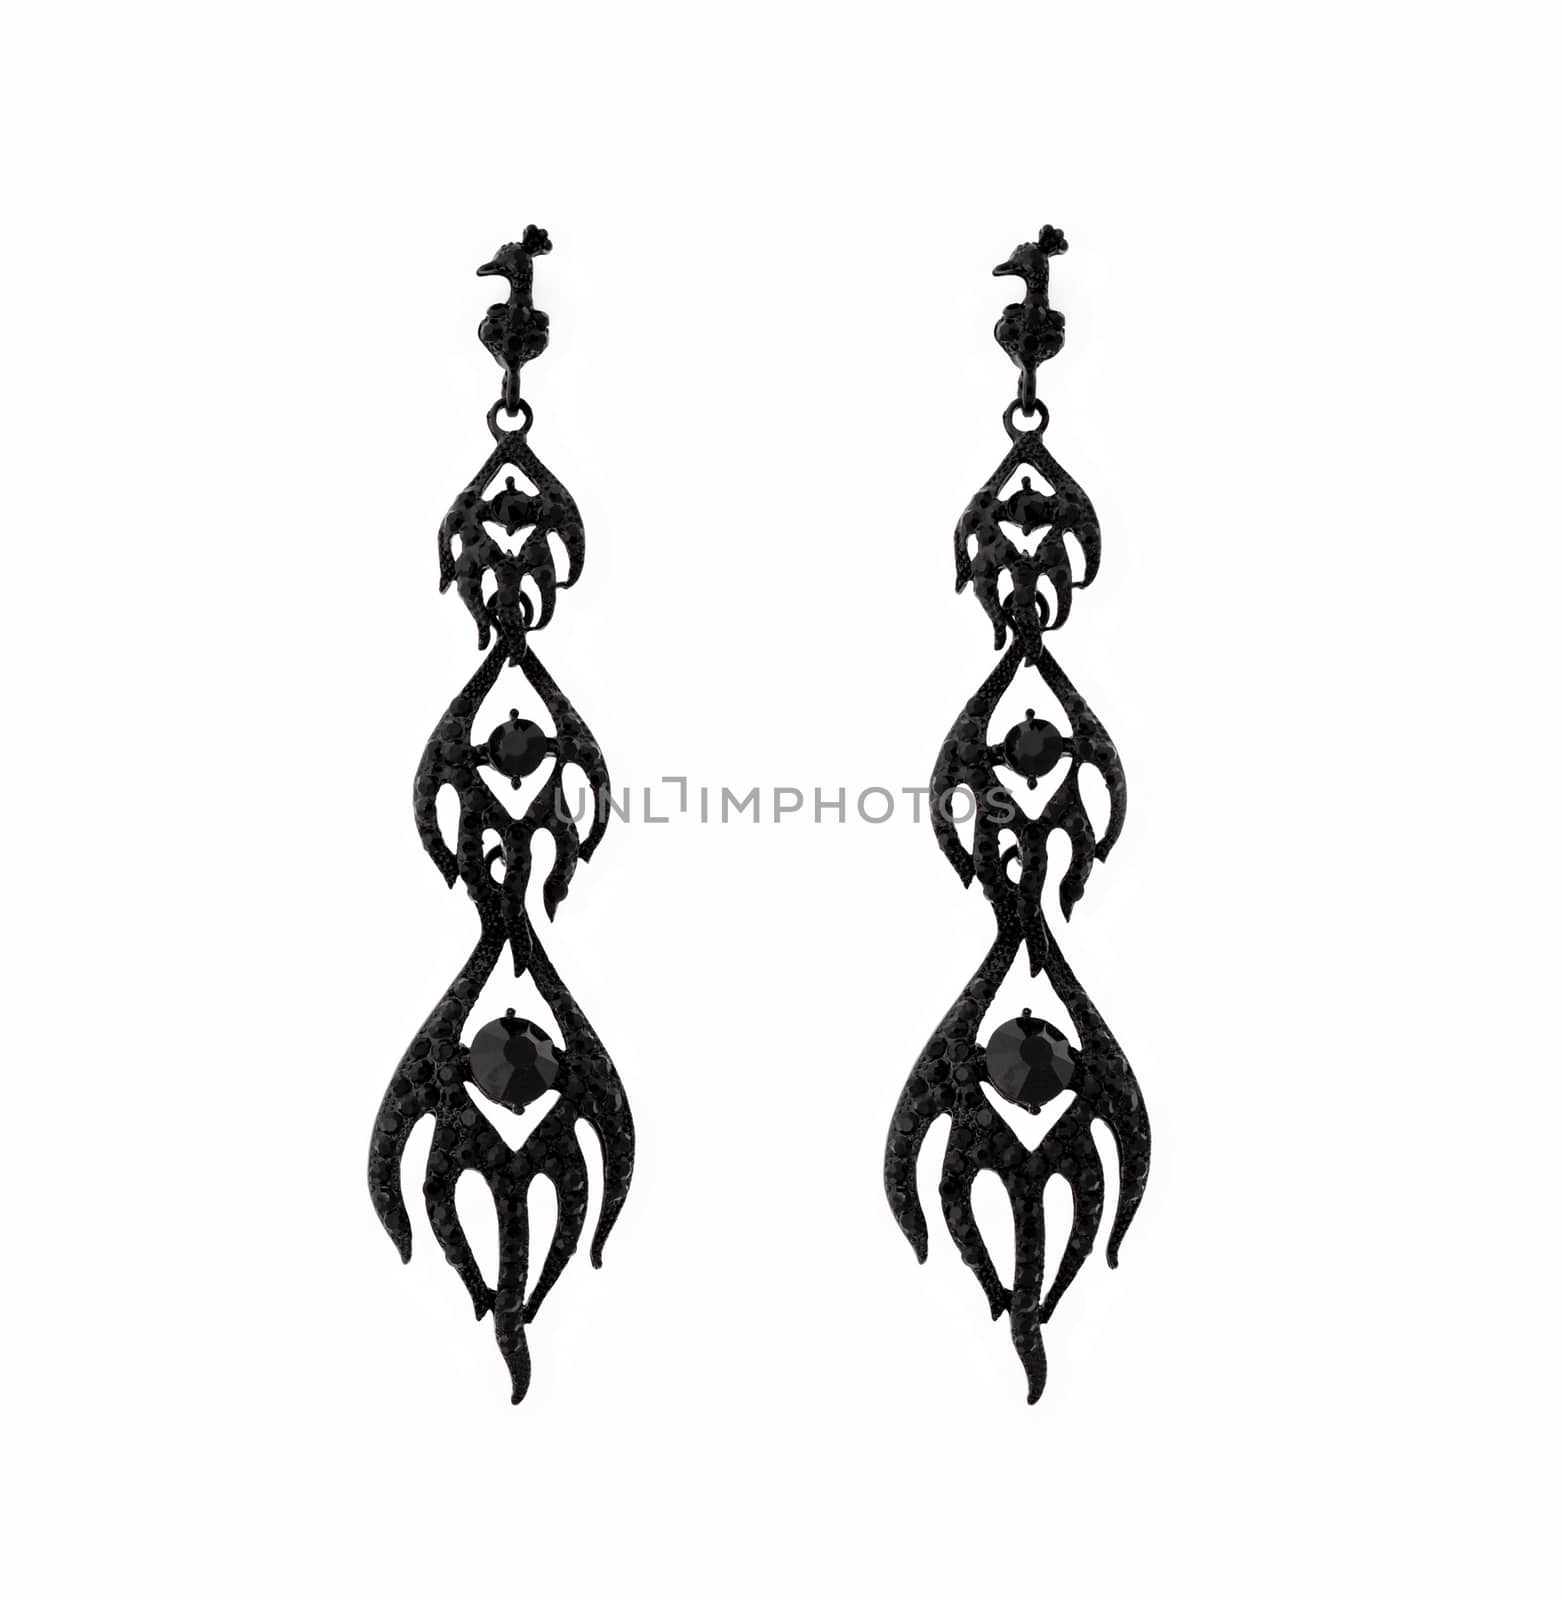 Black earrings with black crystals on a white background by Nikola30